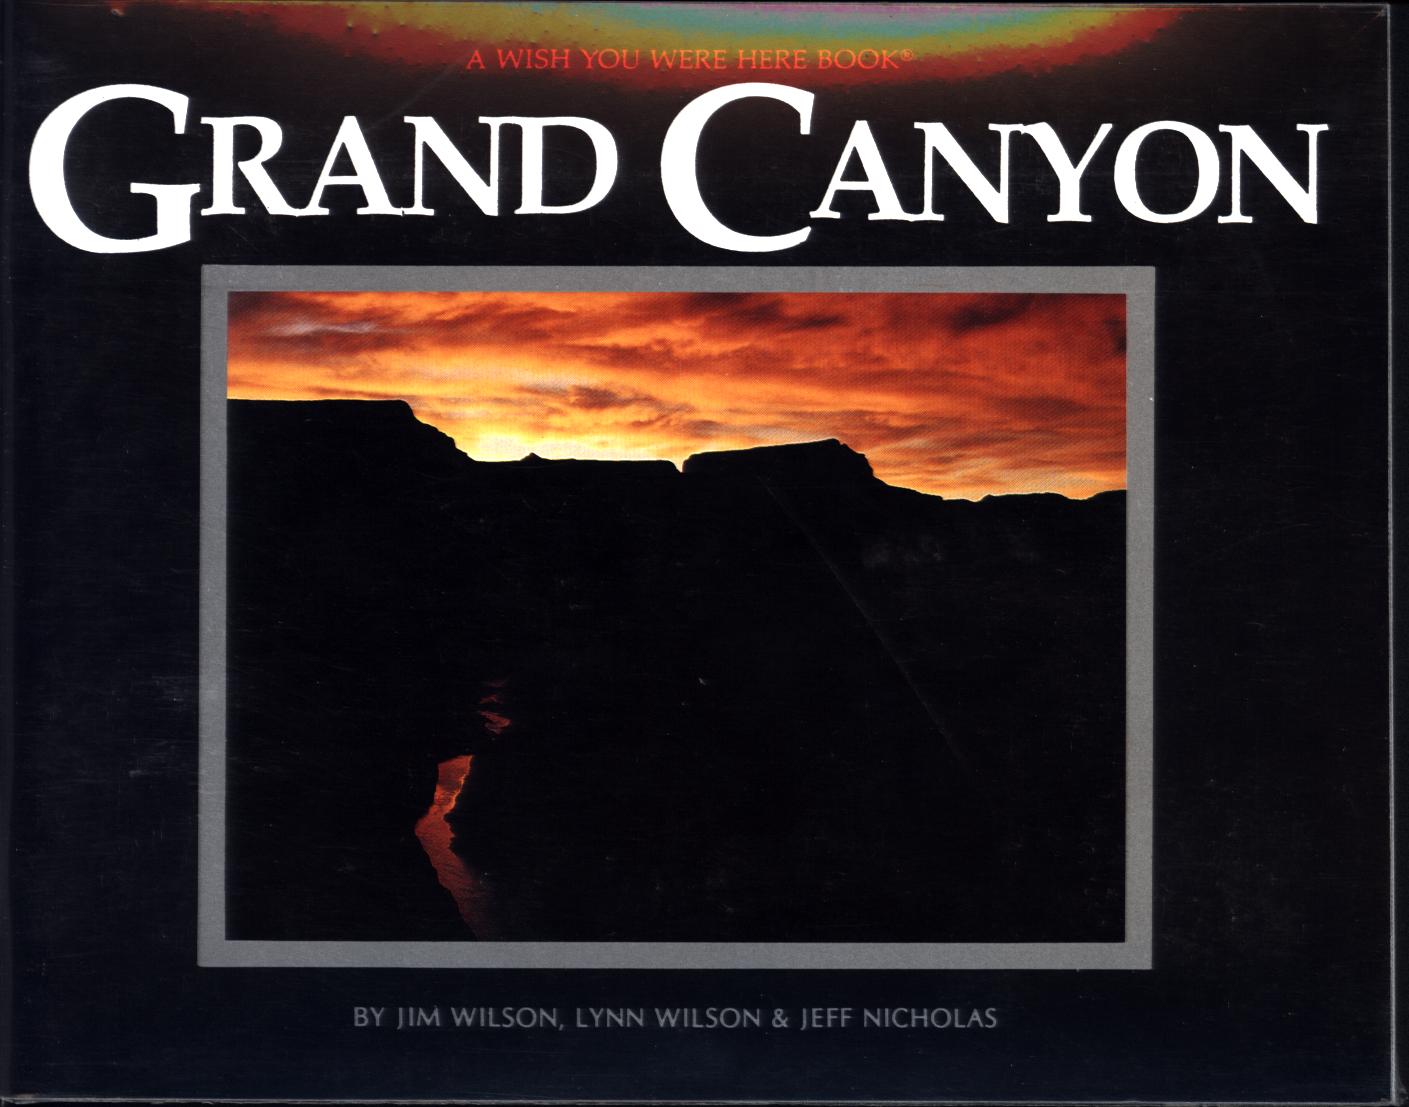 GRAND CANYON: a wish you were here book.